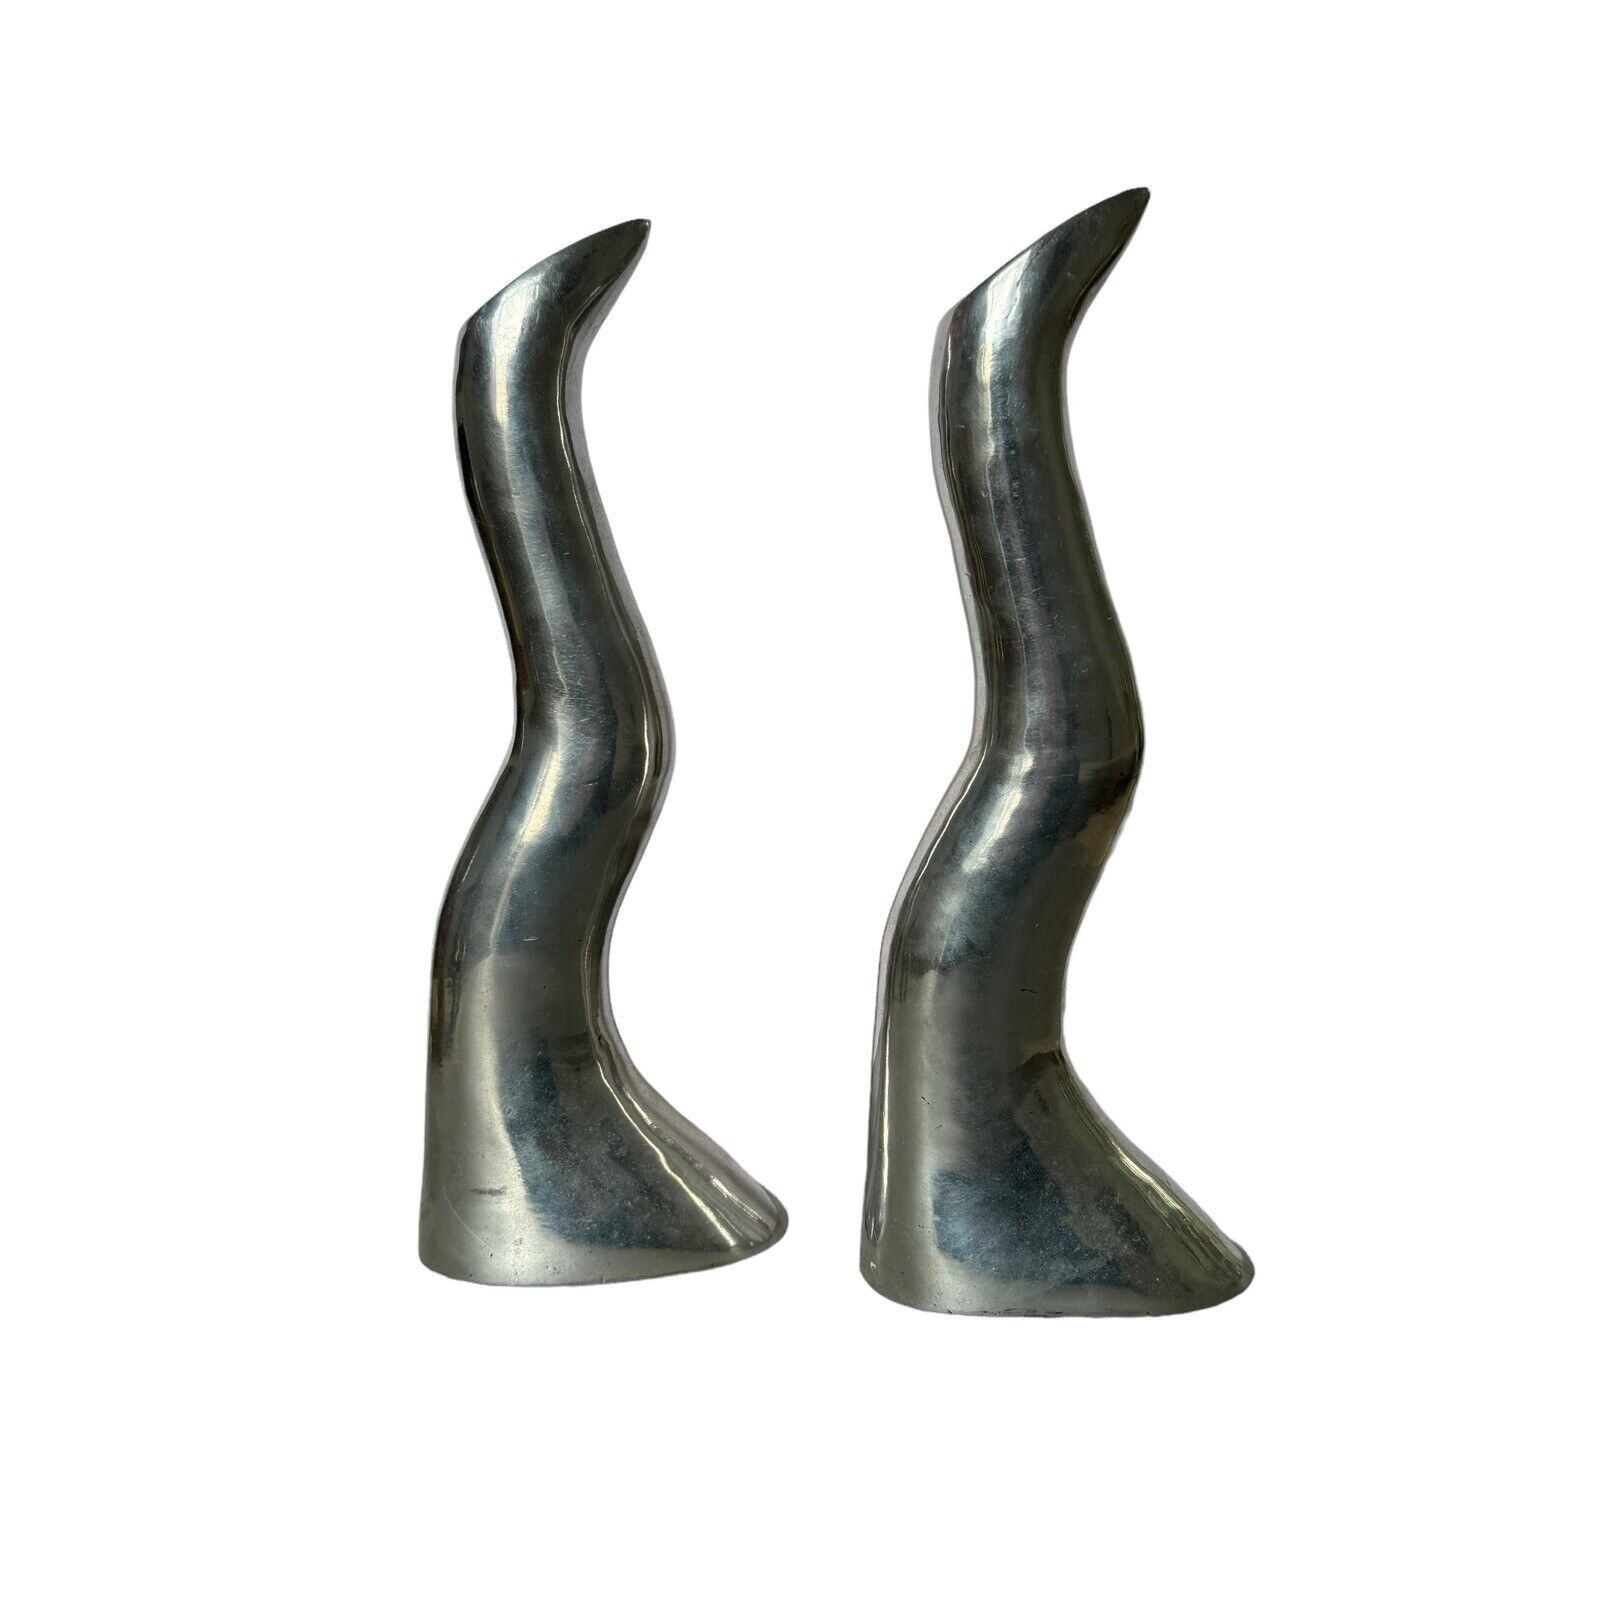 Modernist Aluminum Candle Holders by Anna Everlund 12